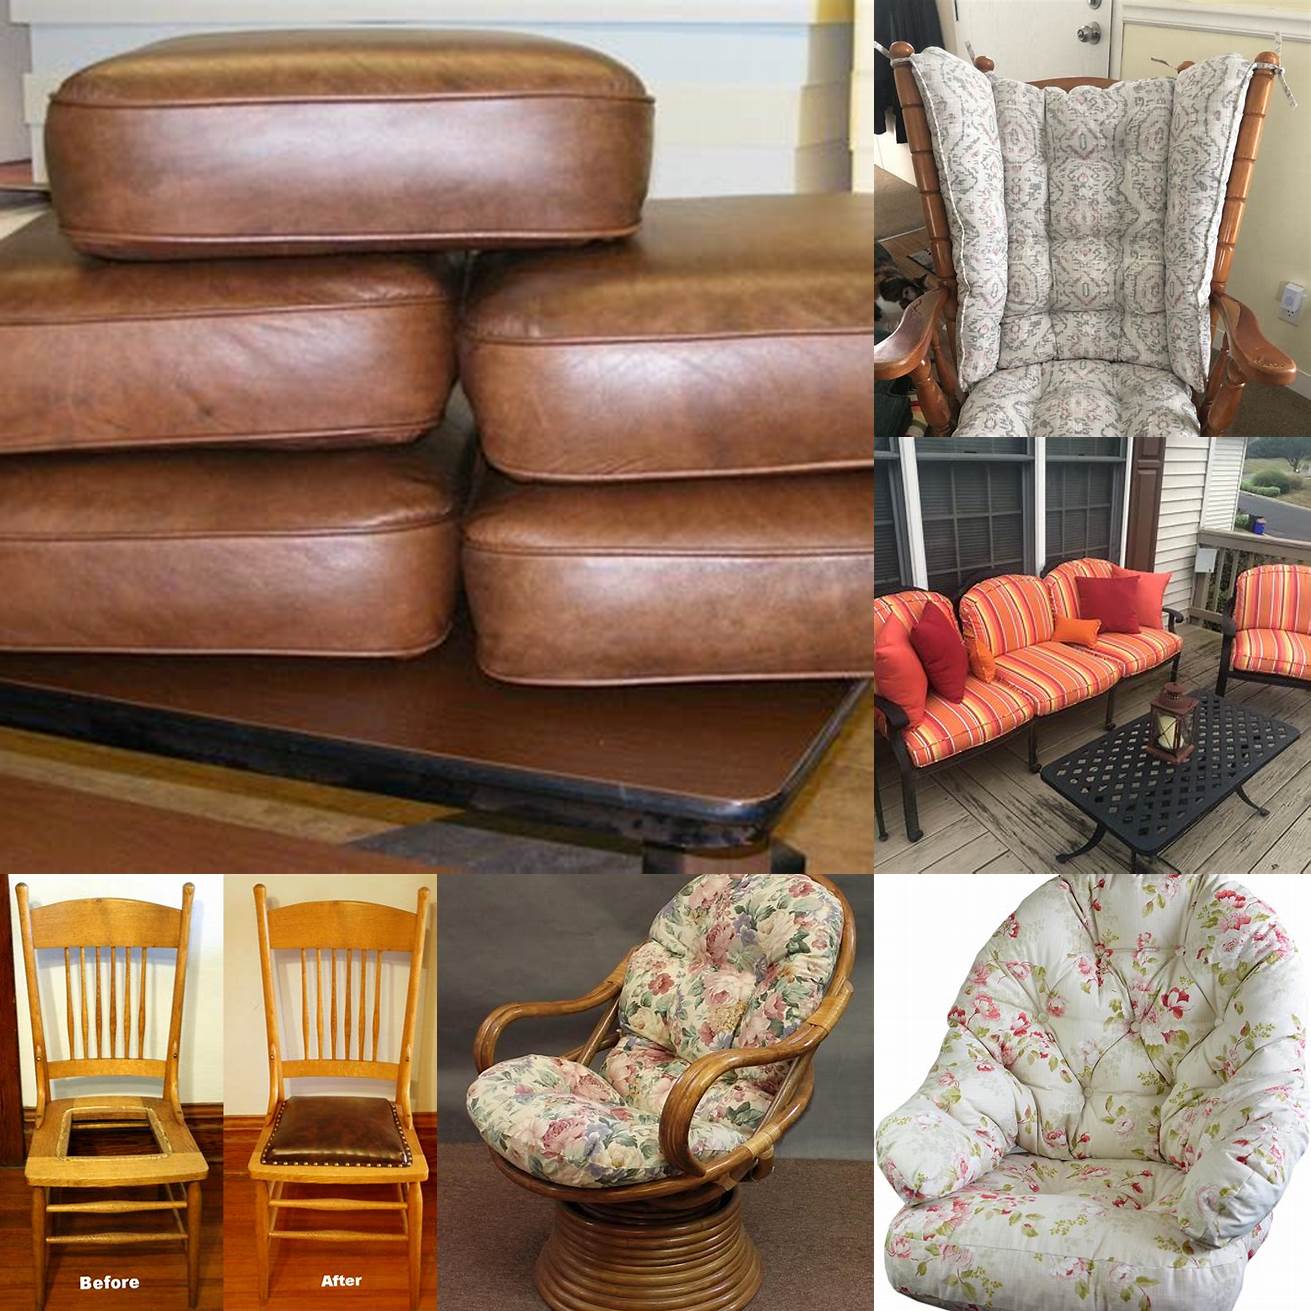 Replace Old Cushions